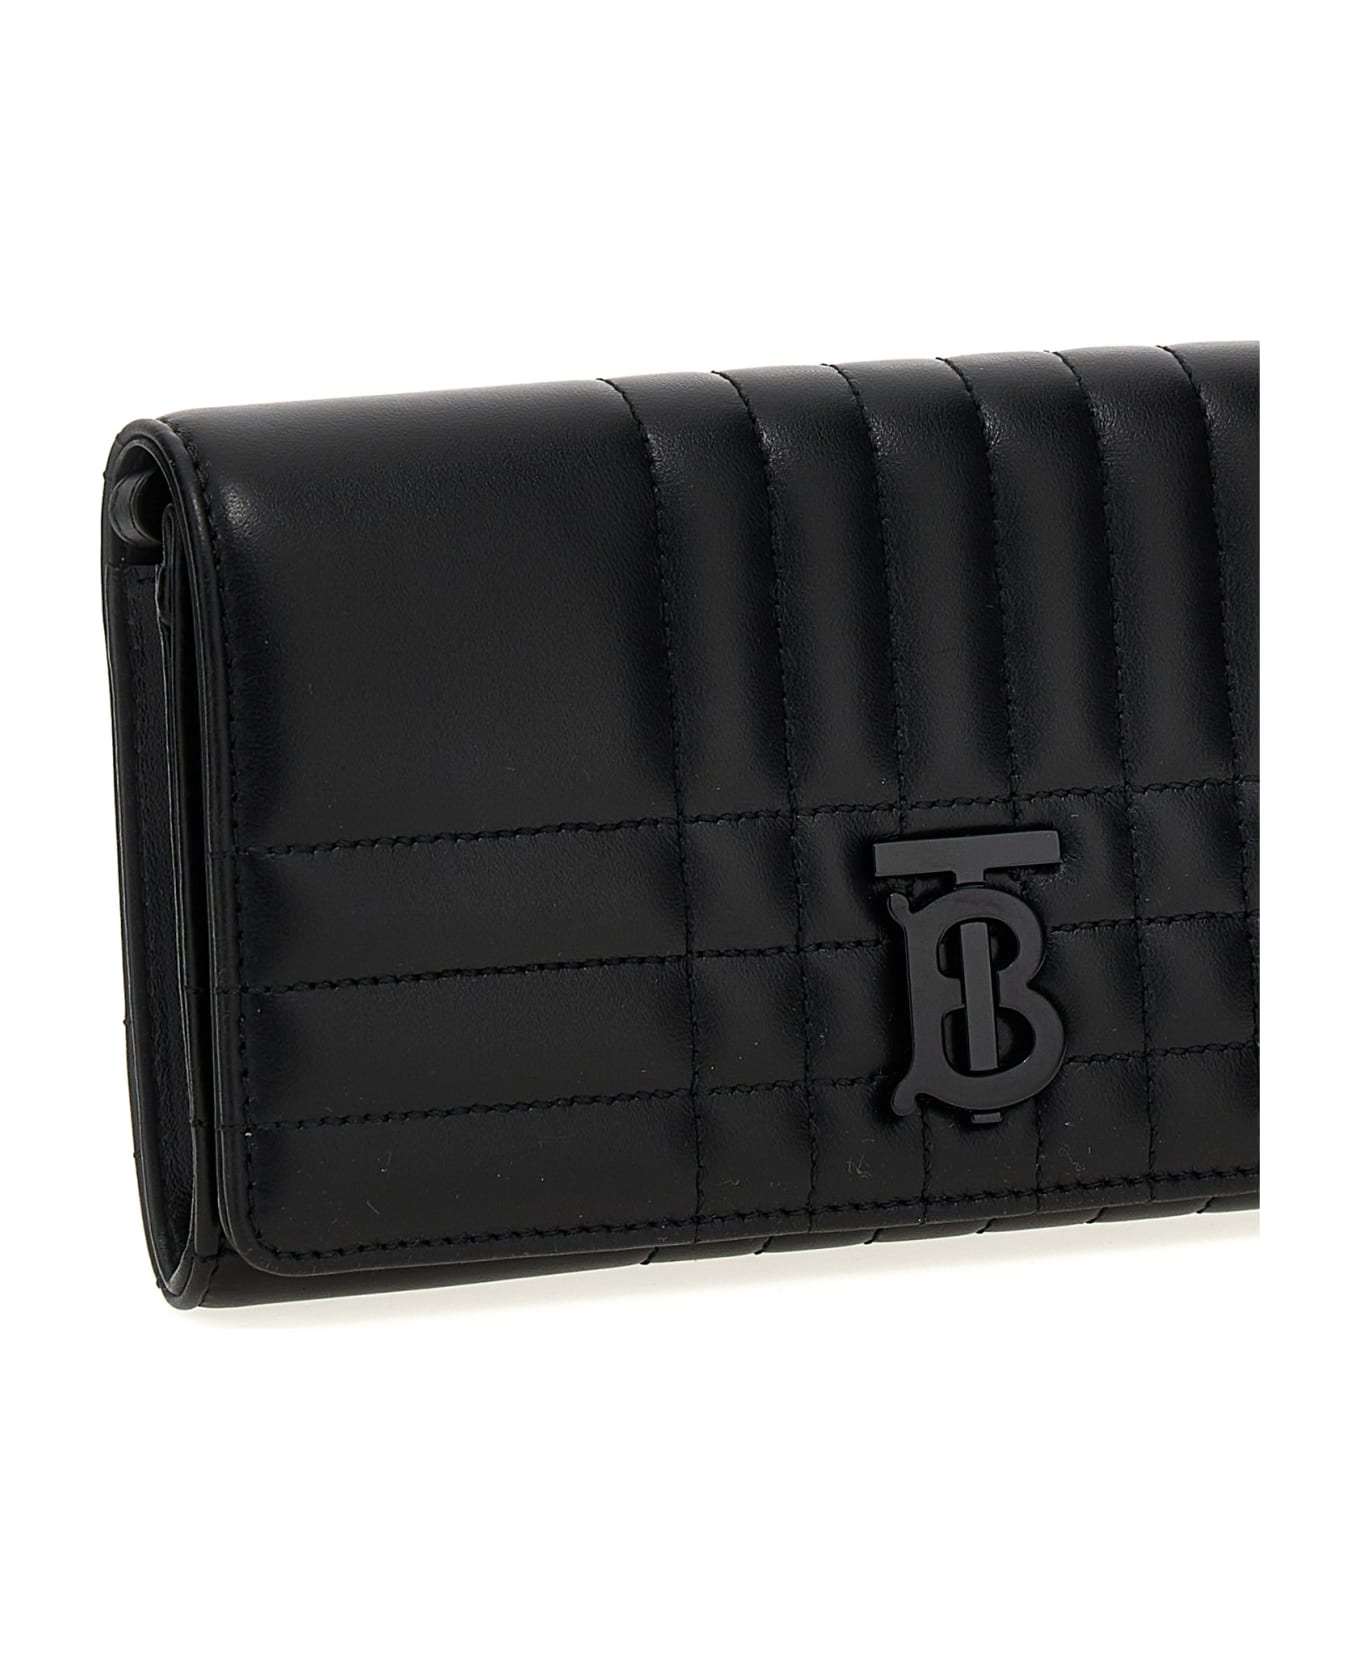 Burberry 'lola' Wallet On Chain - Black  